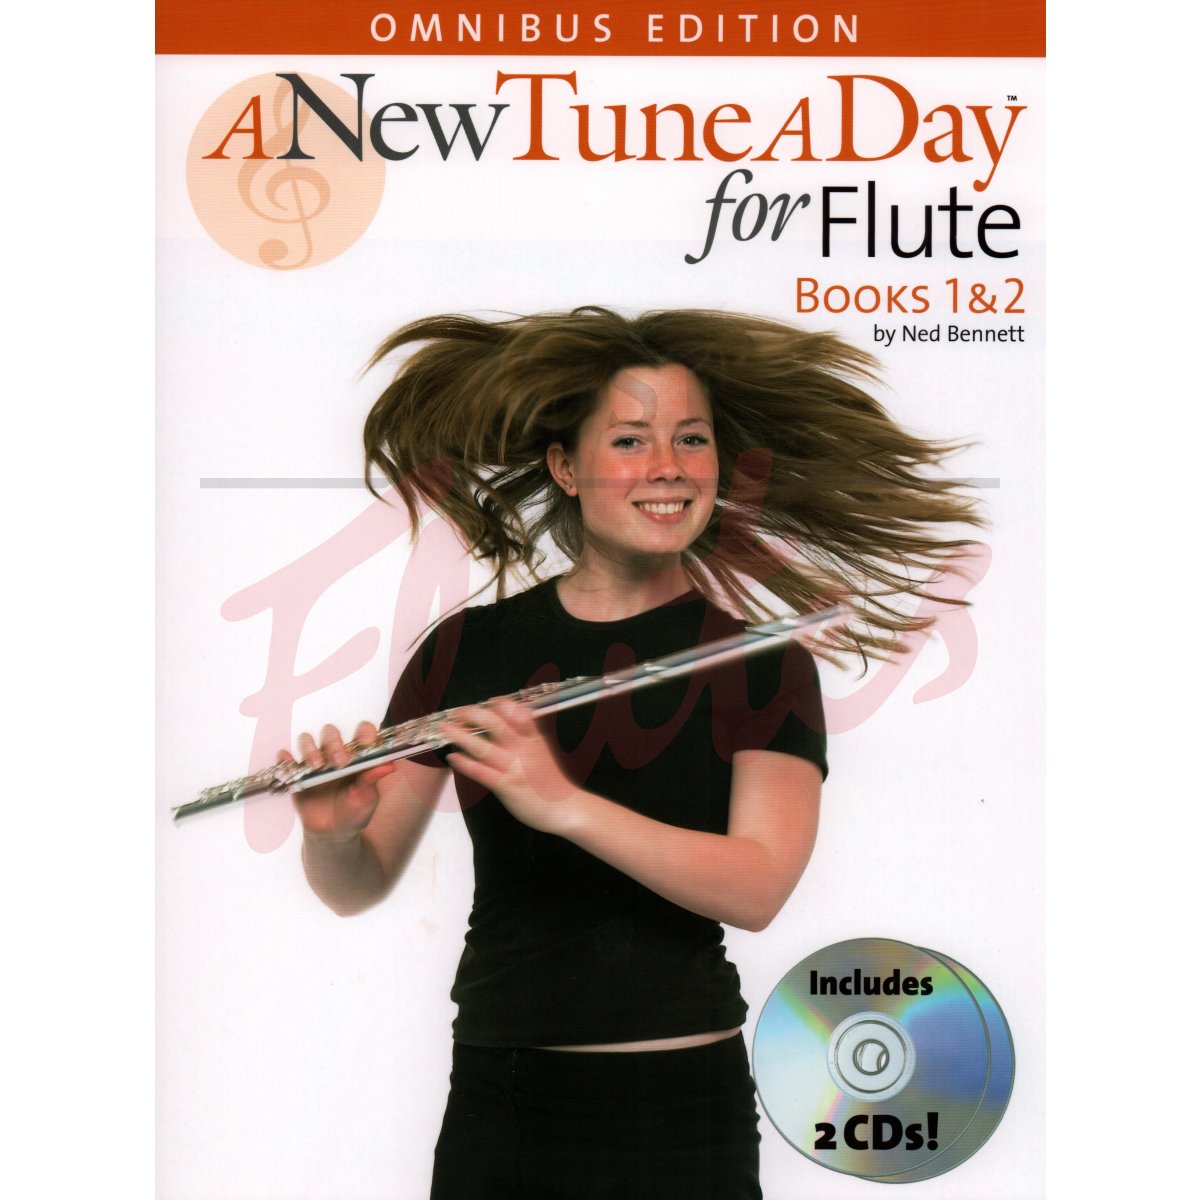 A New Tune A Day for Flute: Omnibus Edition